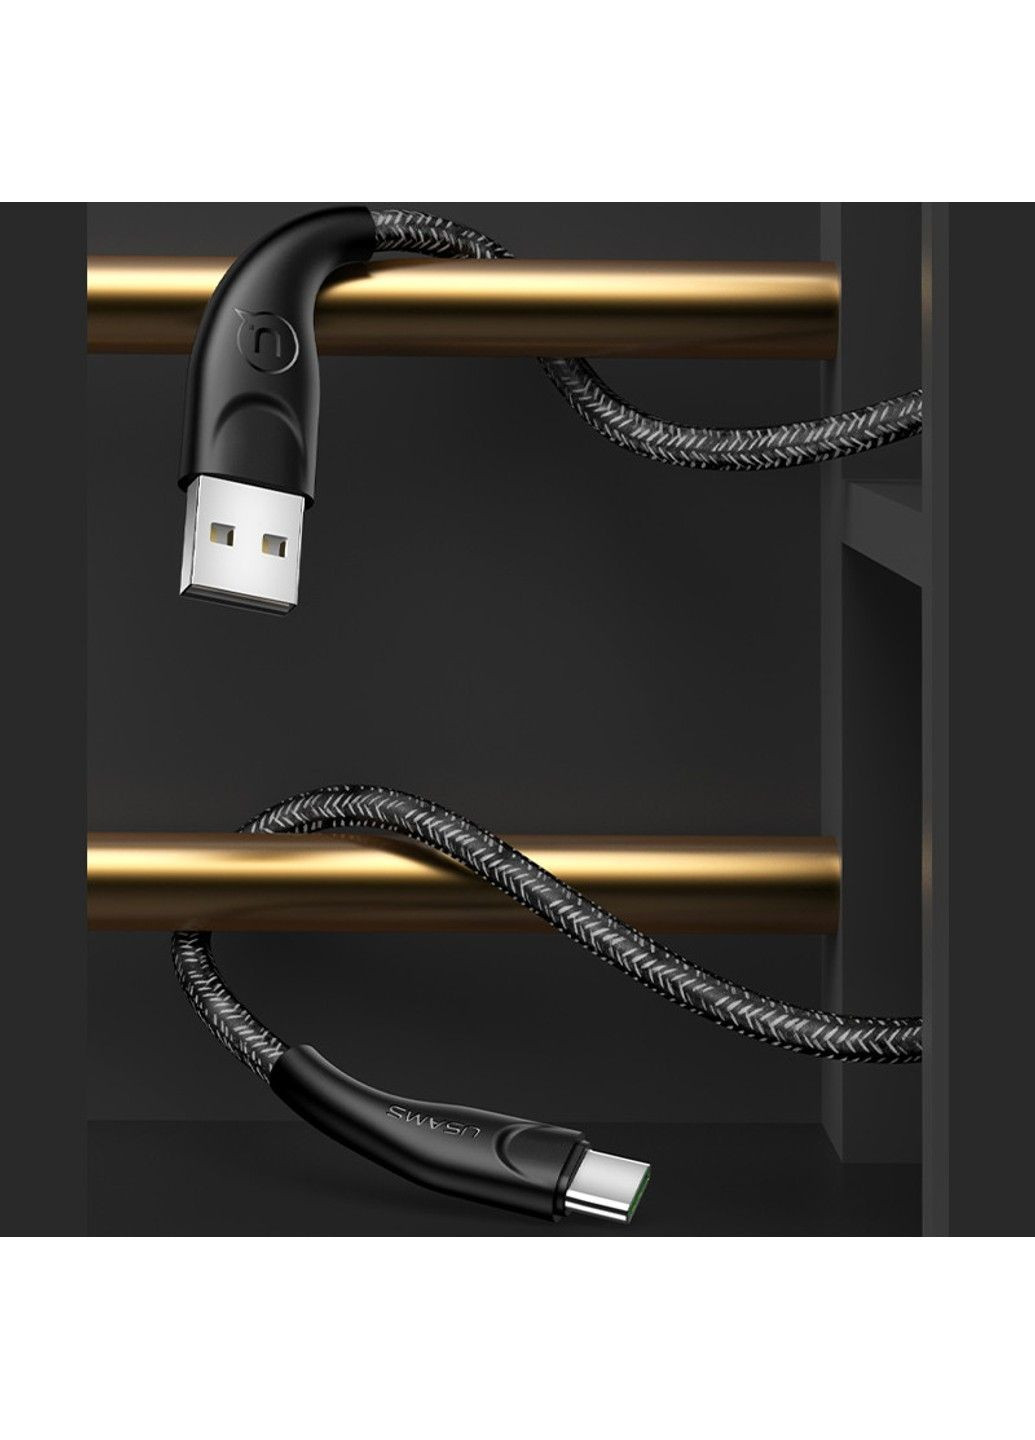 Дата кабель US-SJ392 U41 Type-C Braided Data and Charging Cable 1m USAMS (294723767)